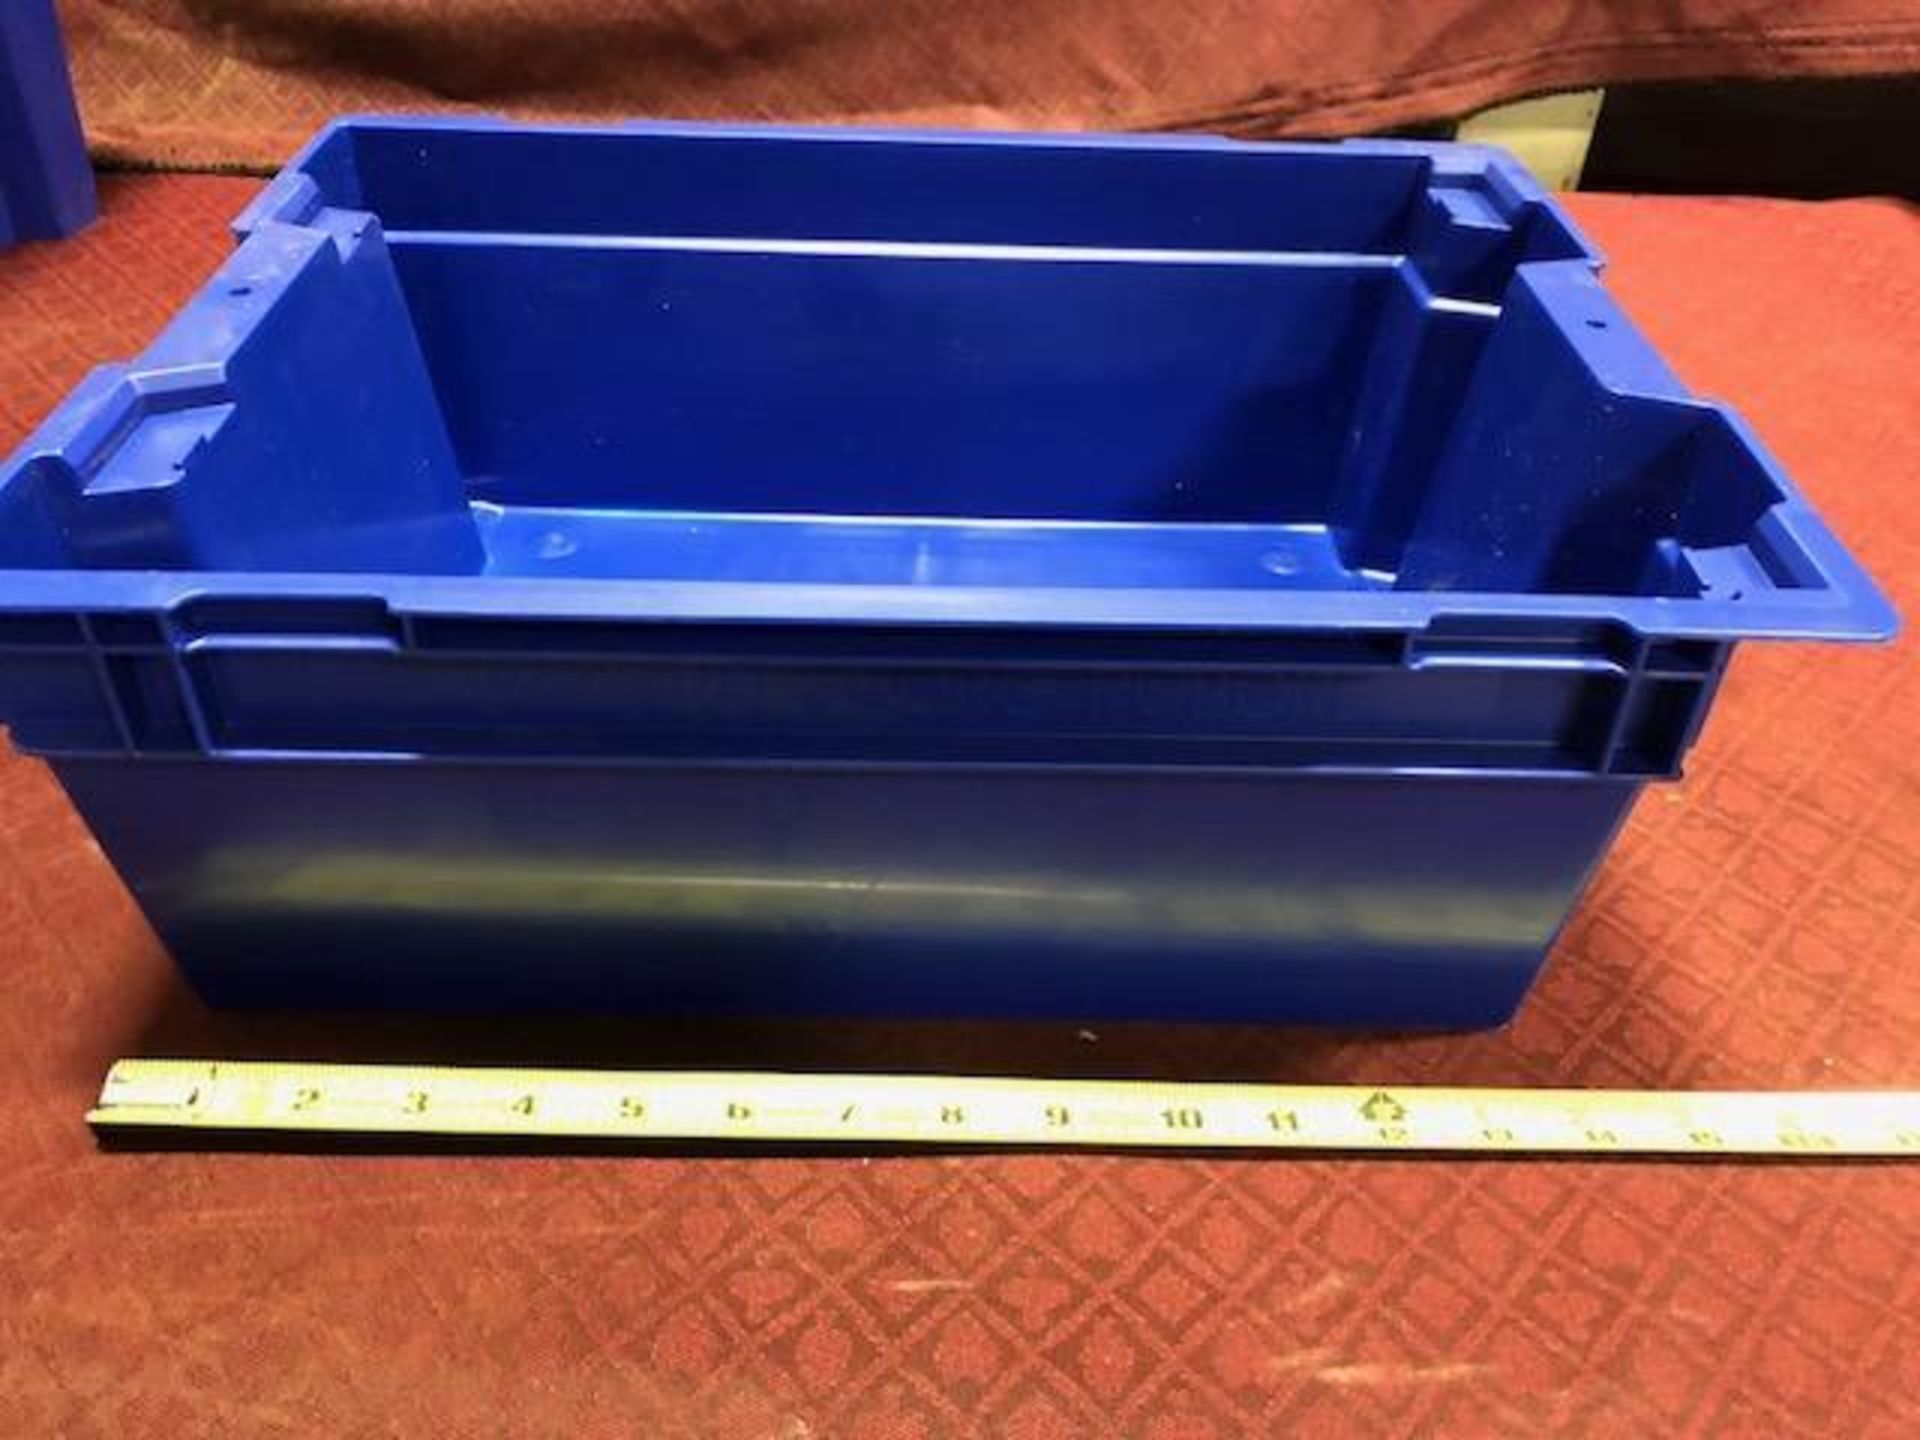 Trelleborg Rubore plastic storage totes. Containing 2 different sizes. (See pics) - Image 3 of 4